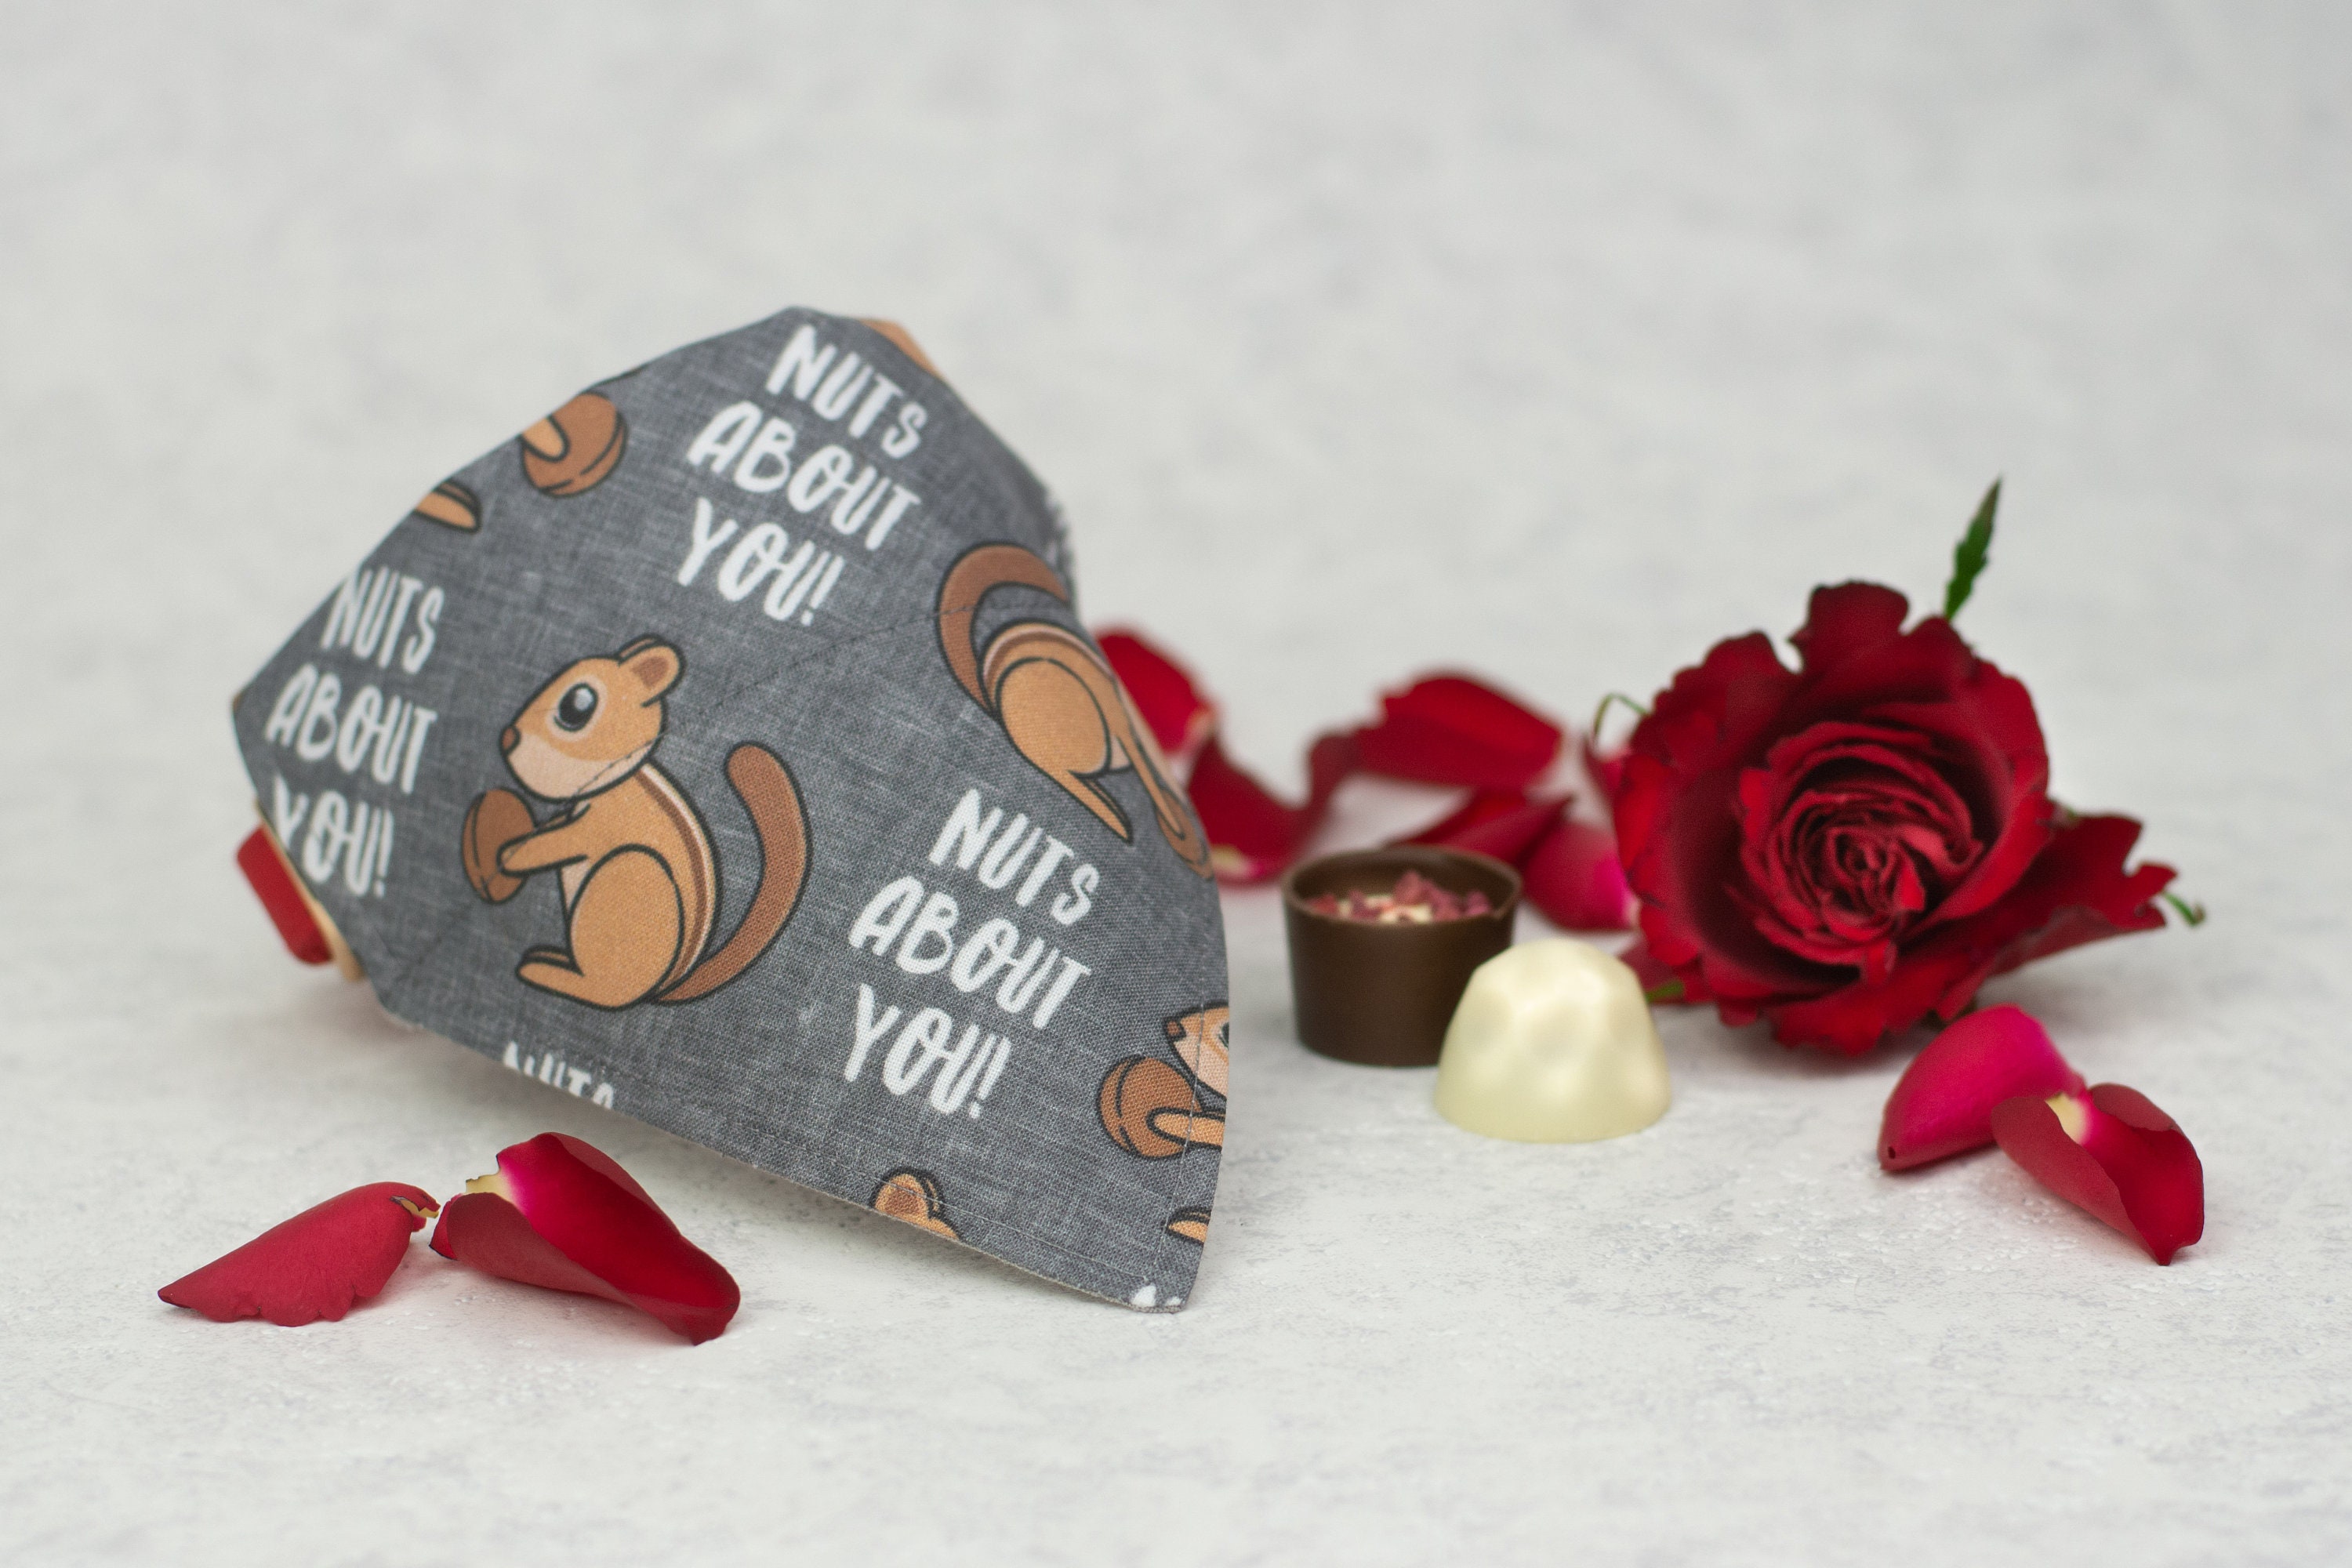 Handmade Dog Bandana Valentines Day Nuts About You